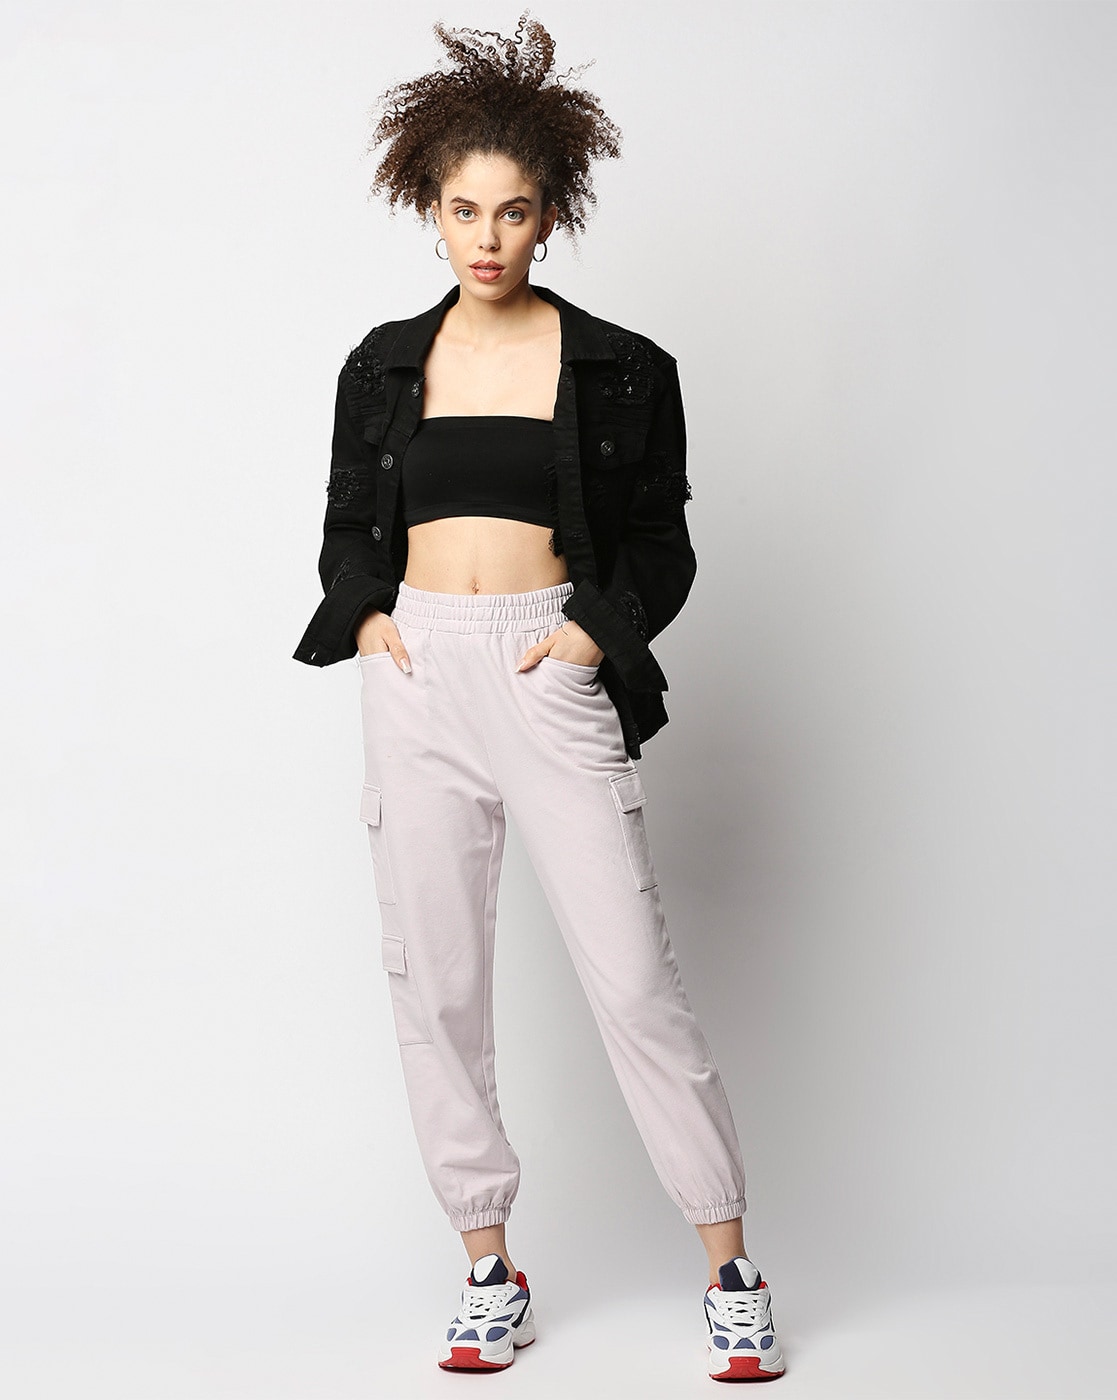 DISRUPT Solid Women Purple Track Pants - Buy DISRUPT Solid Women Purple  Track Pants Online at Best Prices in India